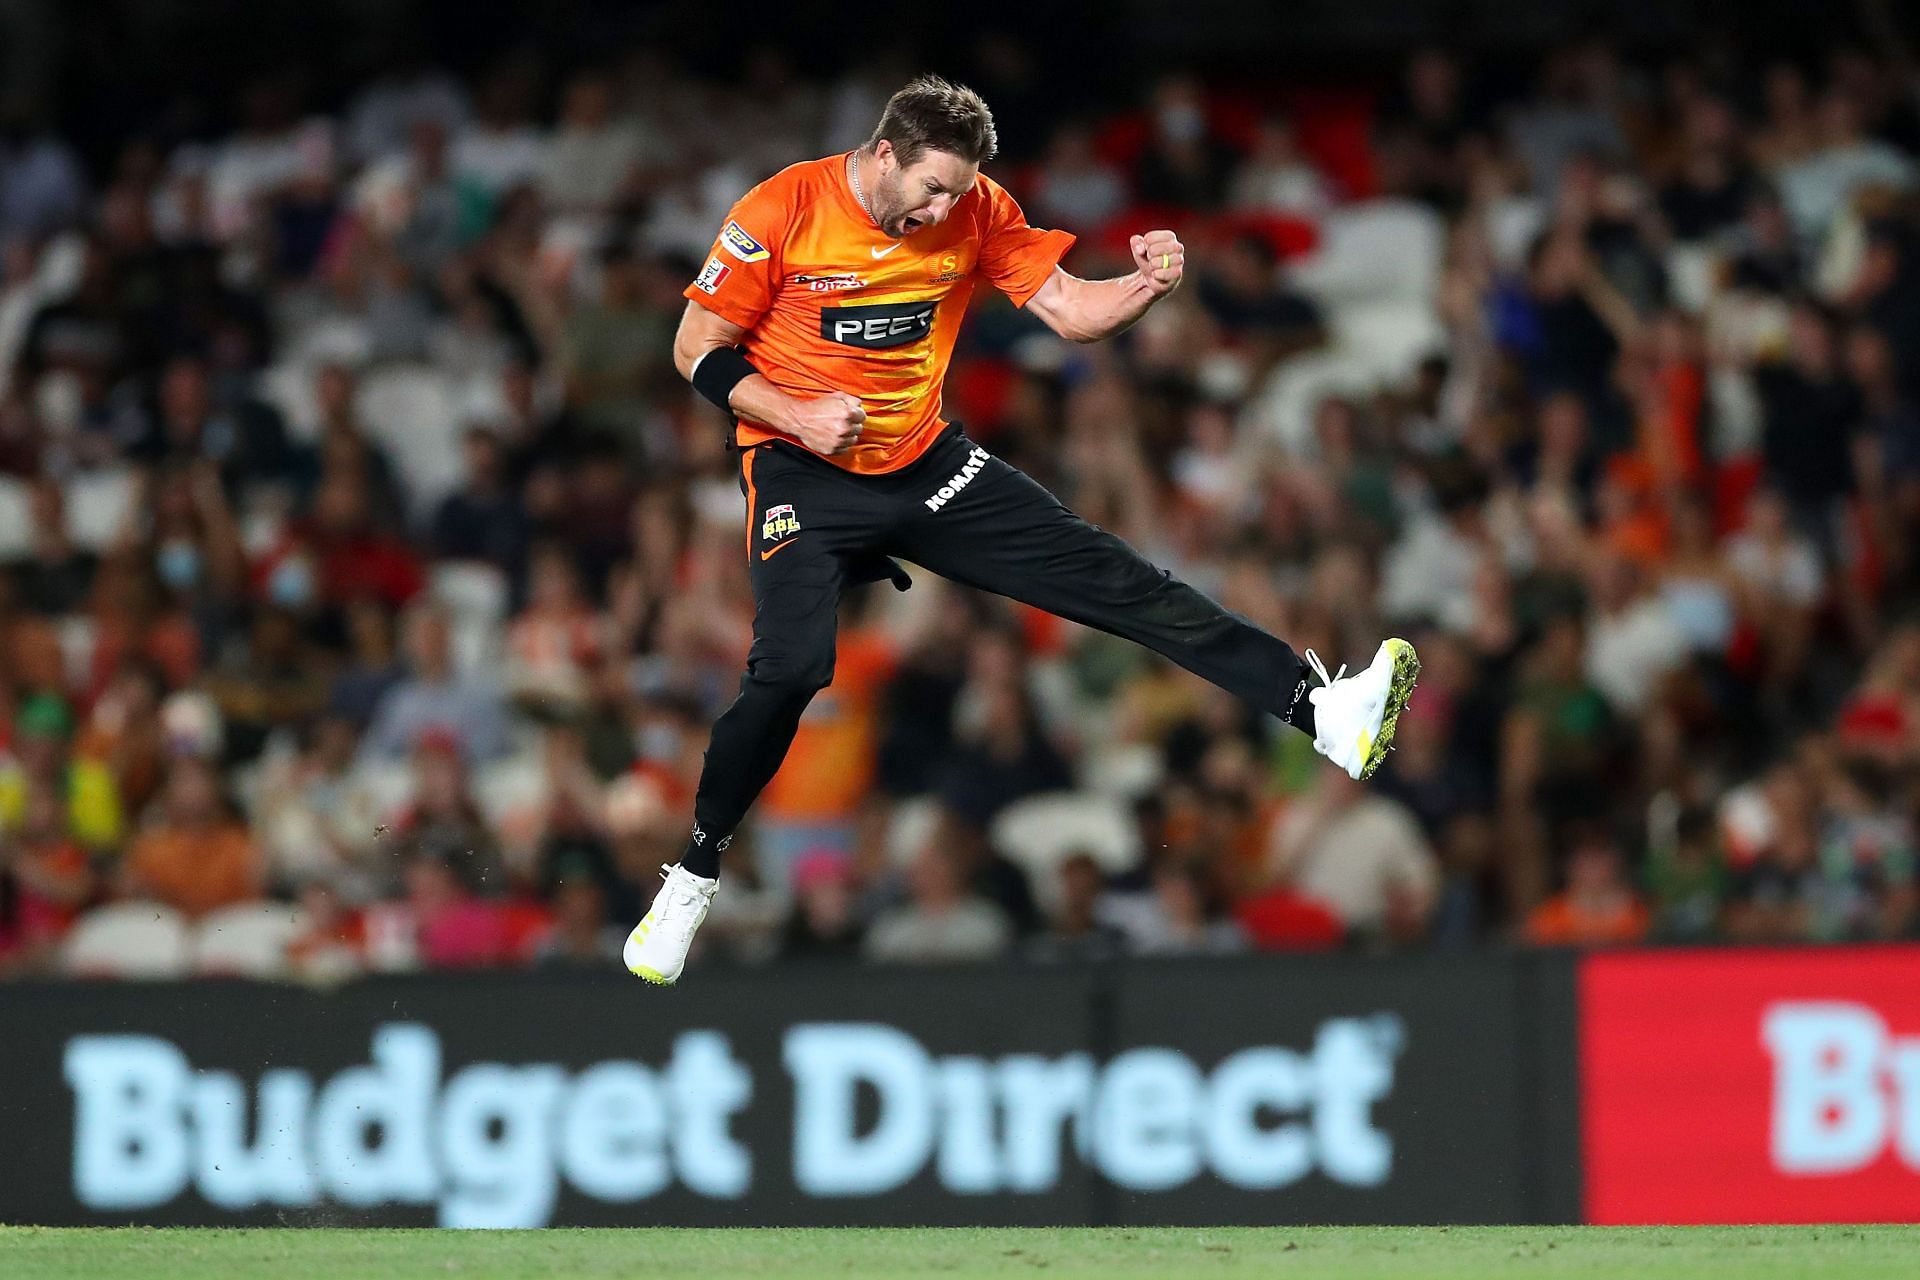 Andrew Tye will represent Lucknow Super Giants in IPL 2022. Pic: Getty Images